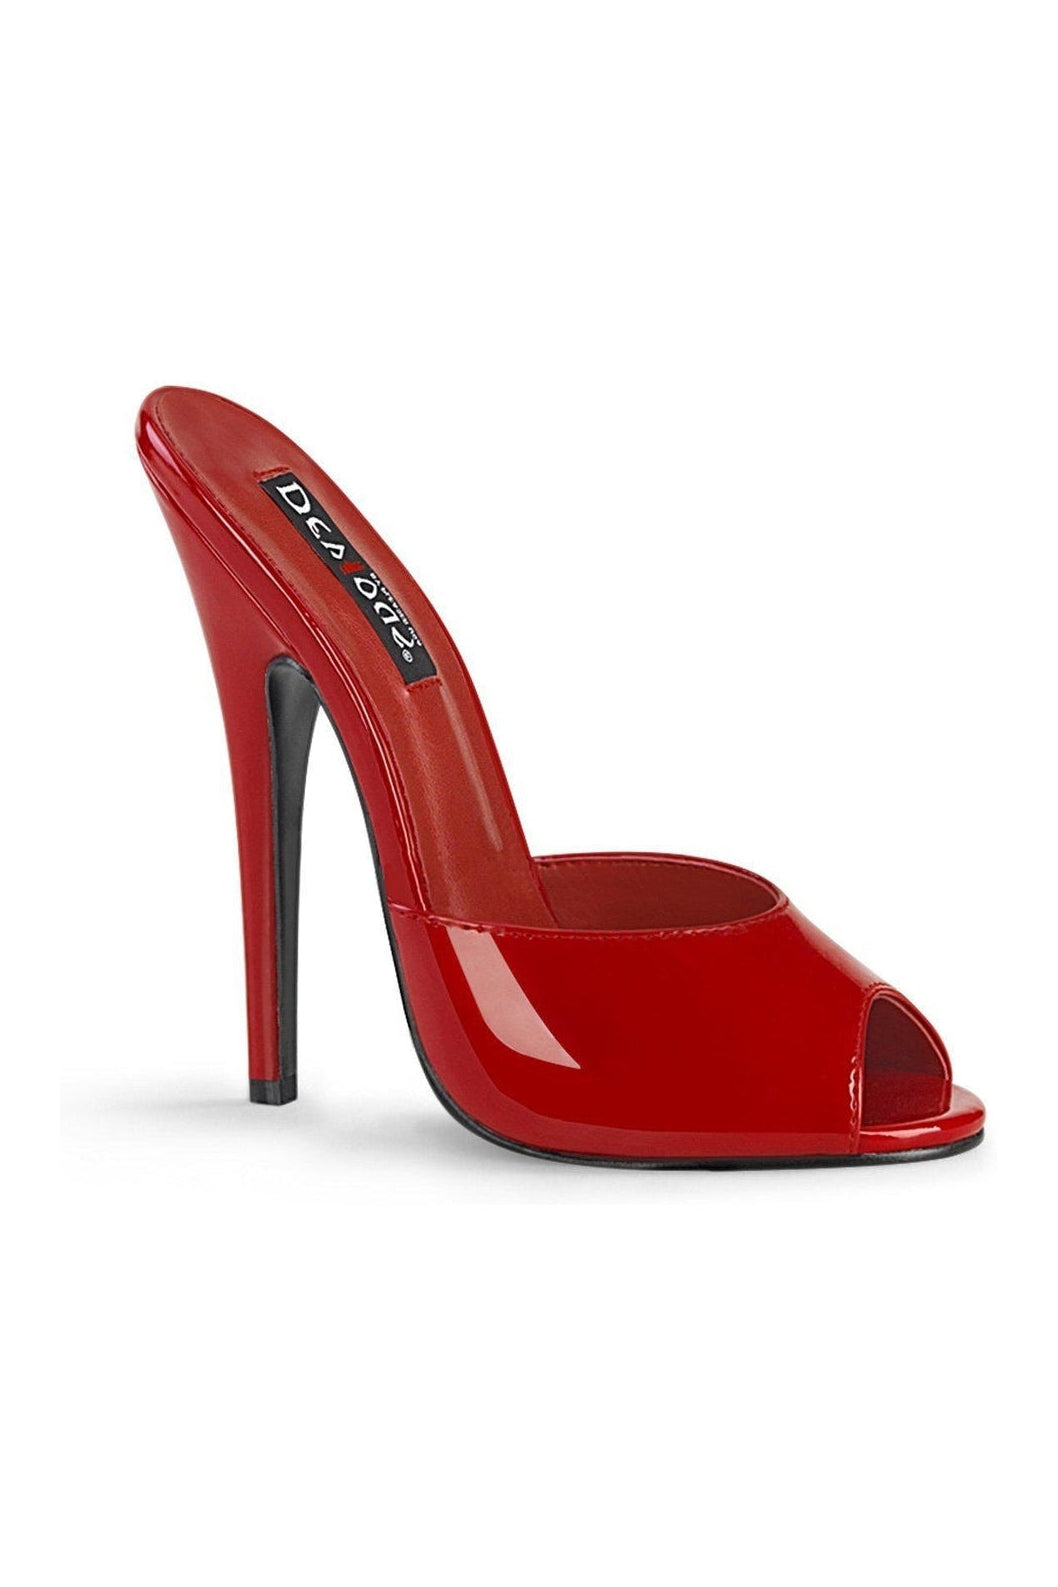 DOMINA-101 Slide | Red Patent-Slides- Stripper Shoes at SEXYSHOES.COM